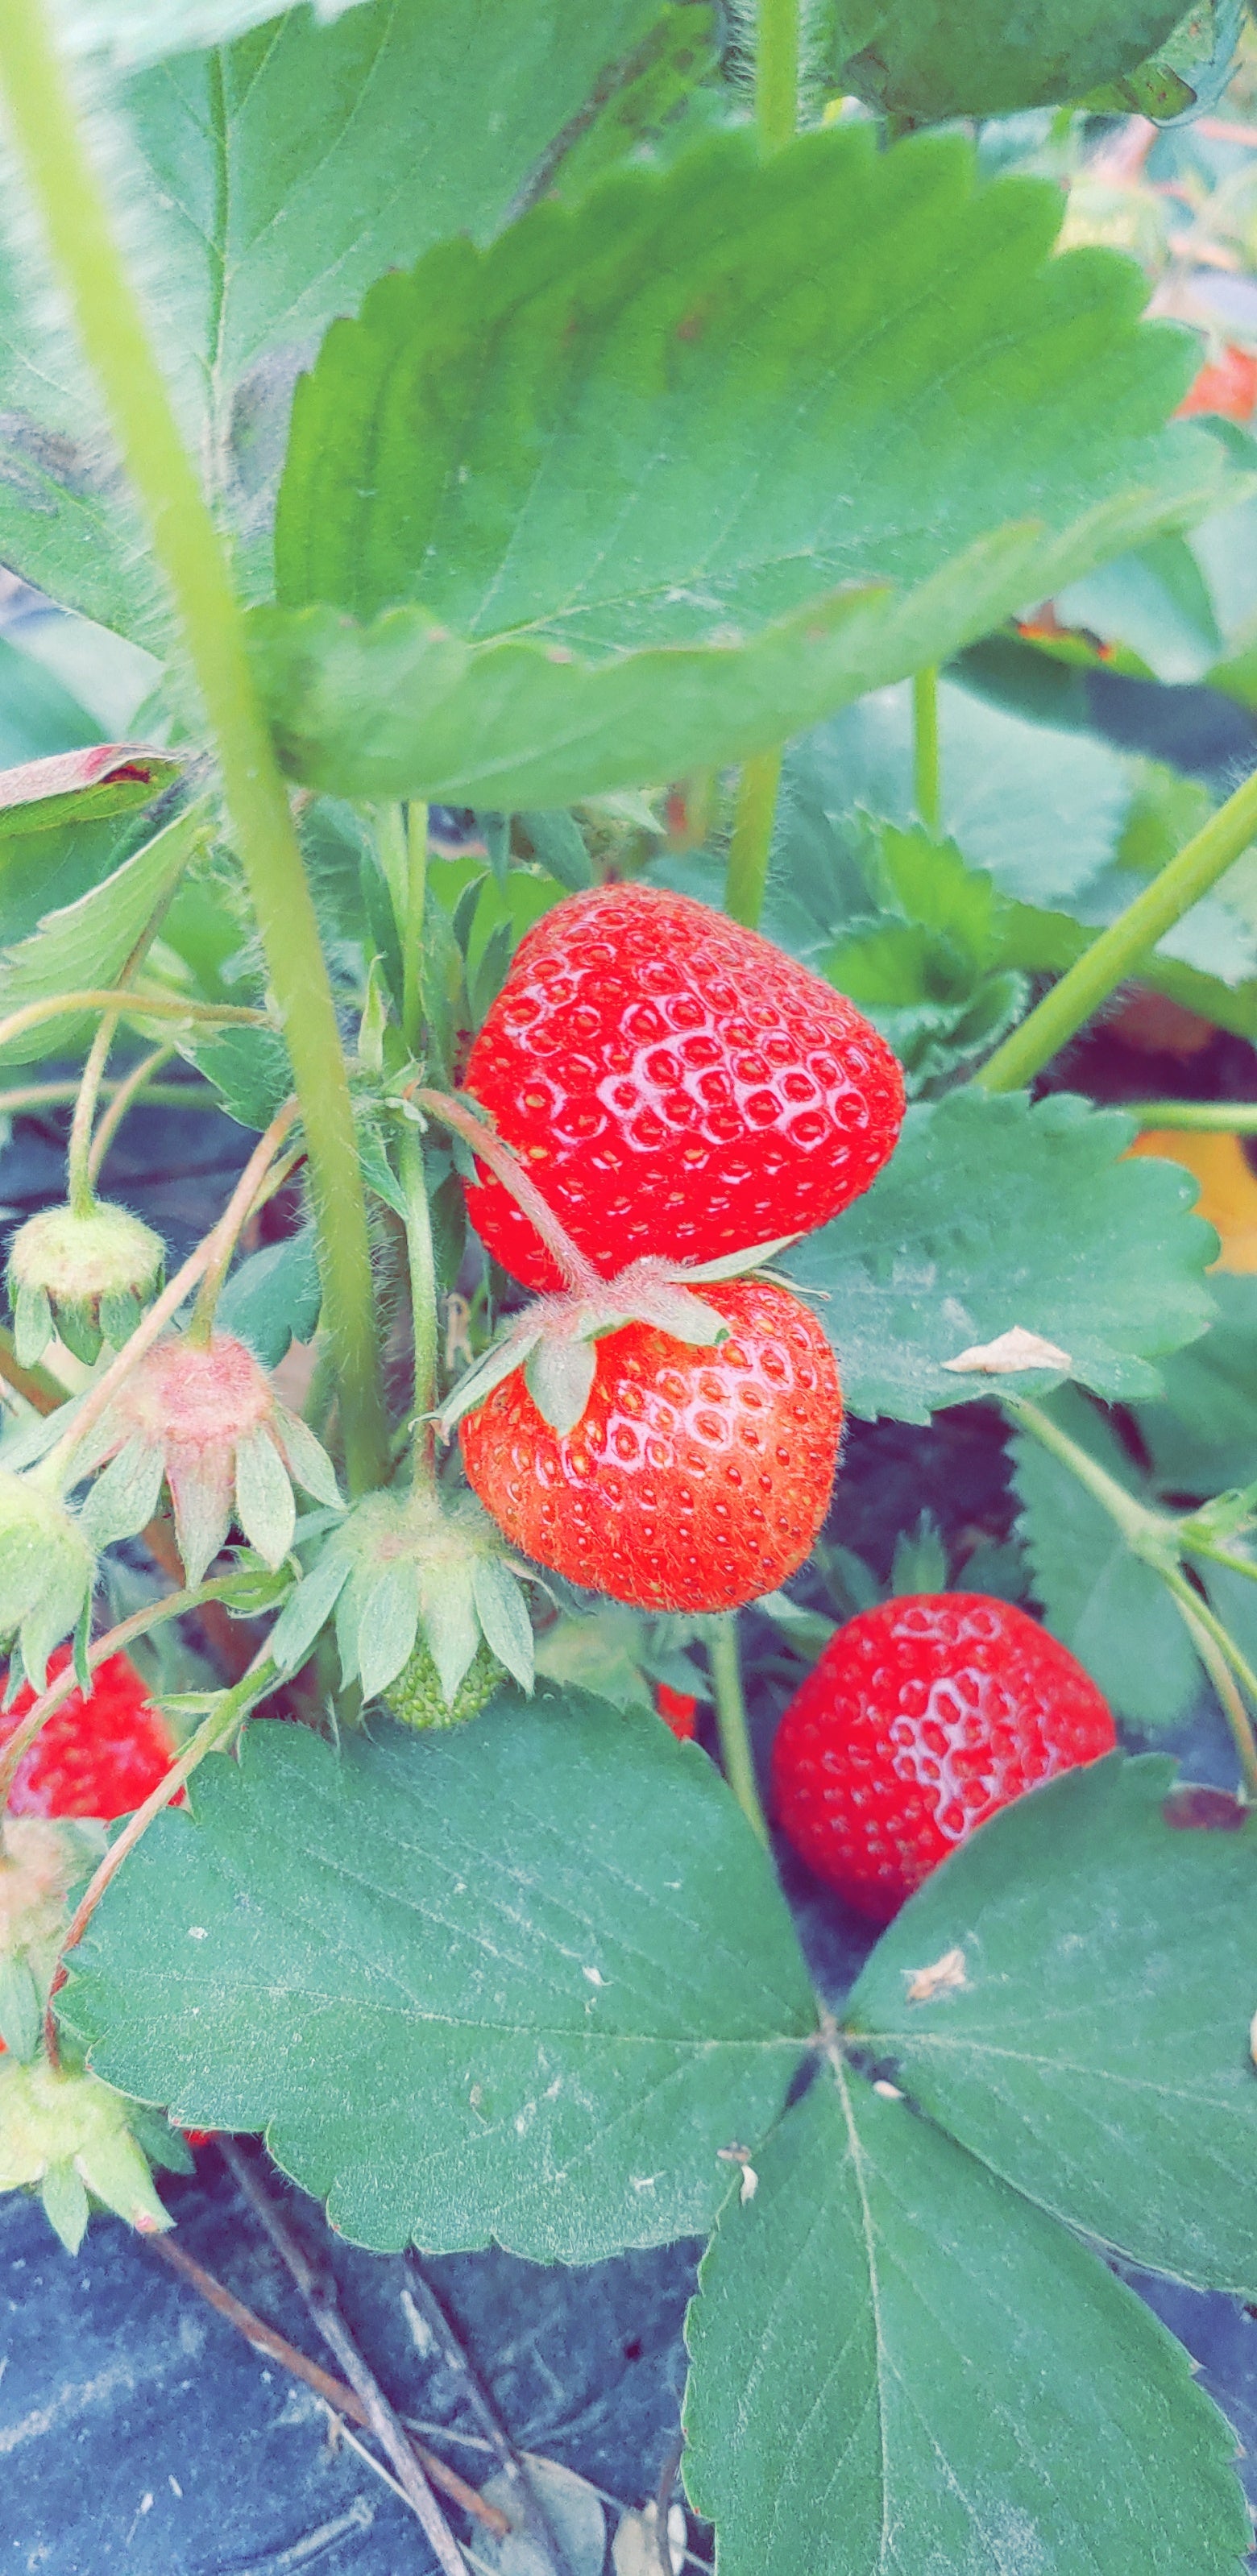 UPICK Strawberries Pre-pay FOR 6/4 only!!